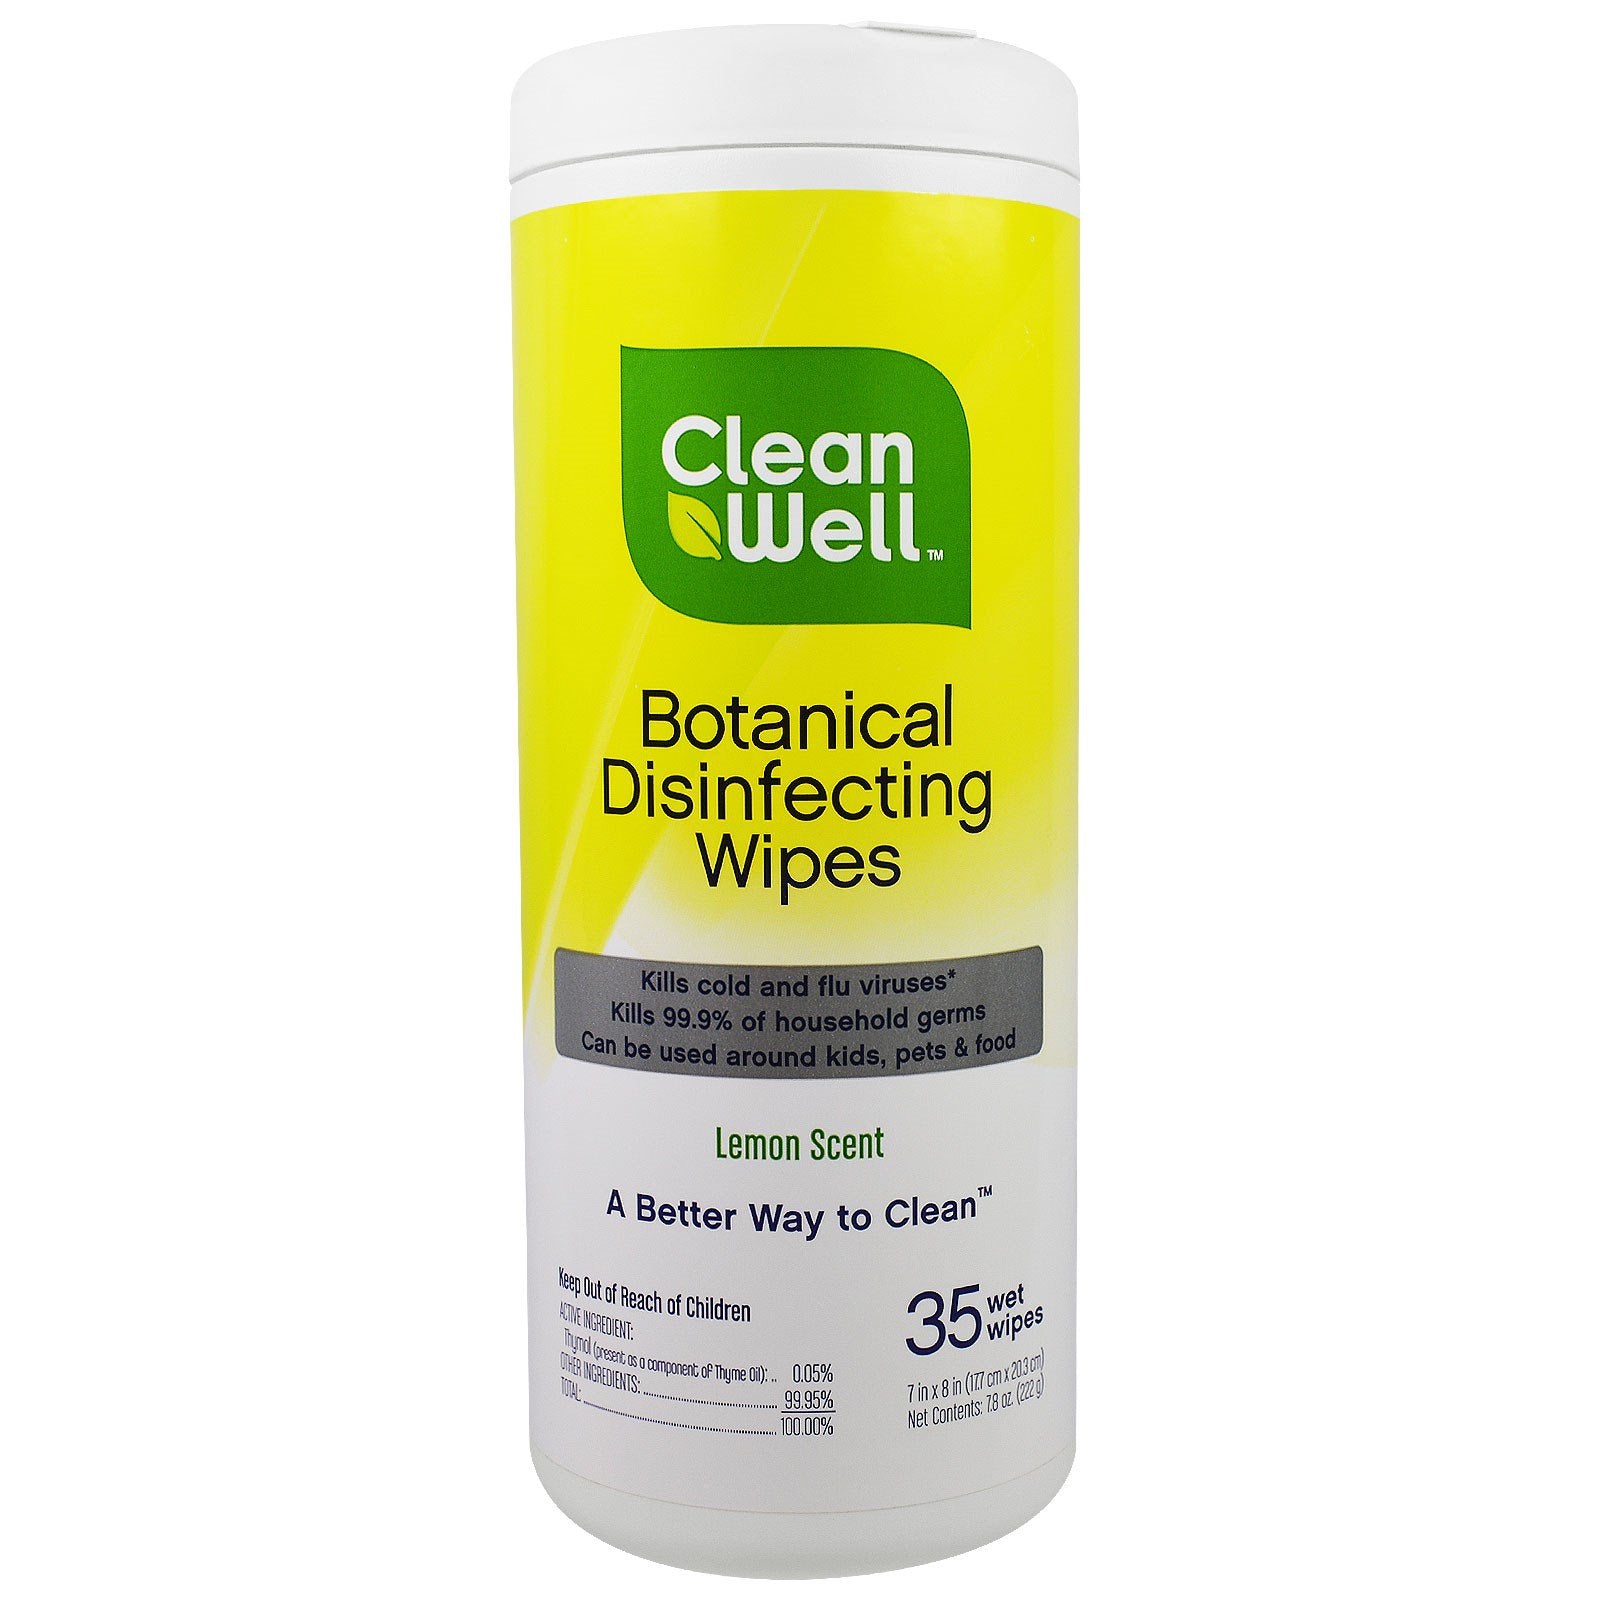 Botanical Disinfecting Wipes 35 wipes